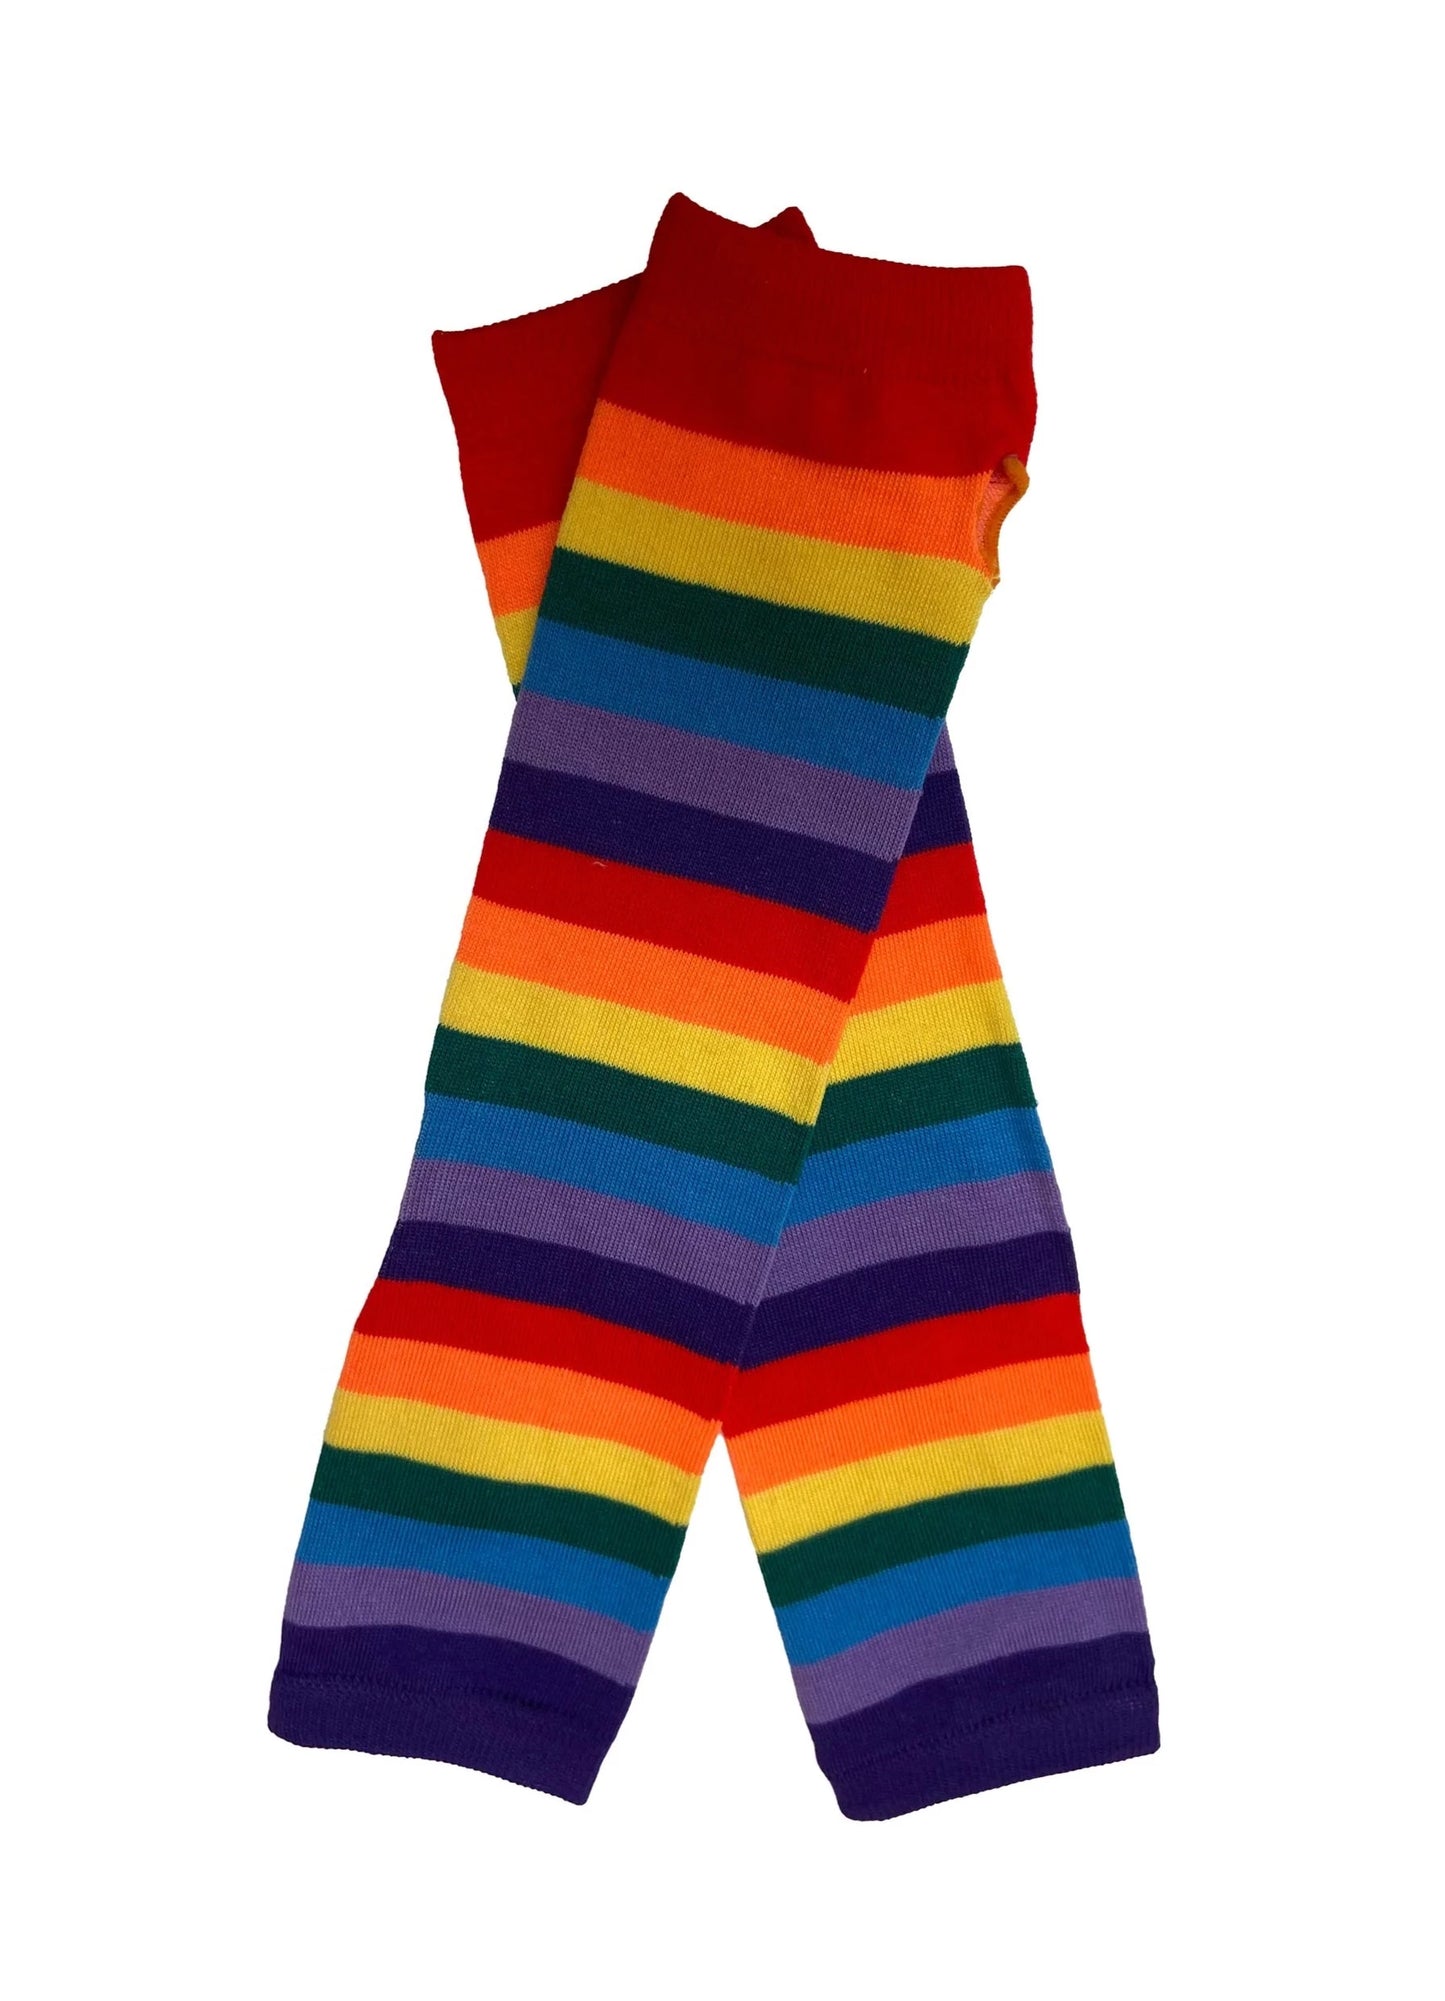 Pamela Mann Rainbow Stripe Sleevers - Multicoloured horizontal rainbow striped knitted tube arm sleeves with a hole for your thumb, can also be worn as a neat legwarmer.